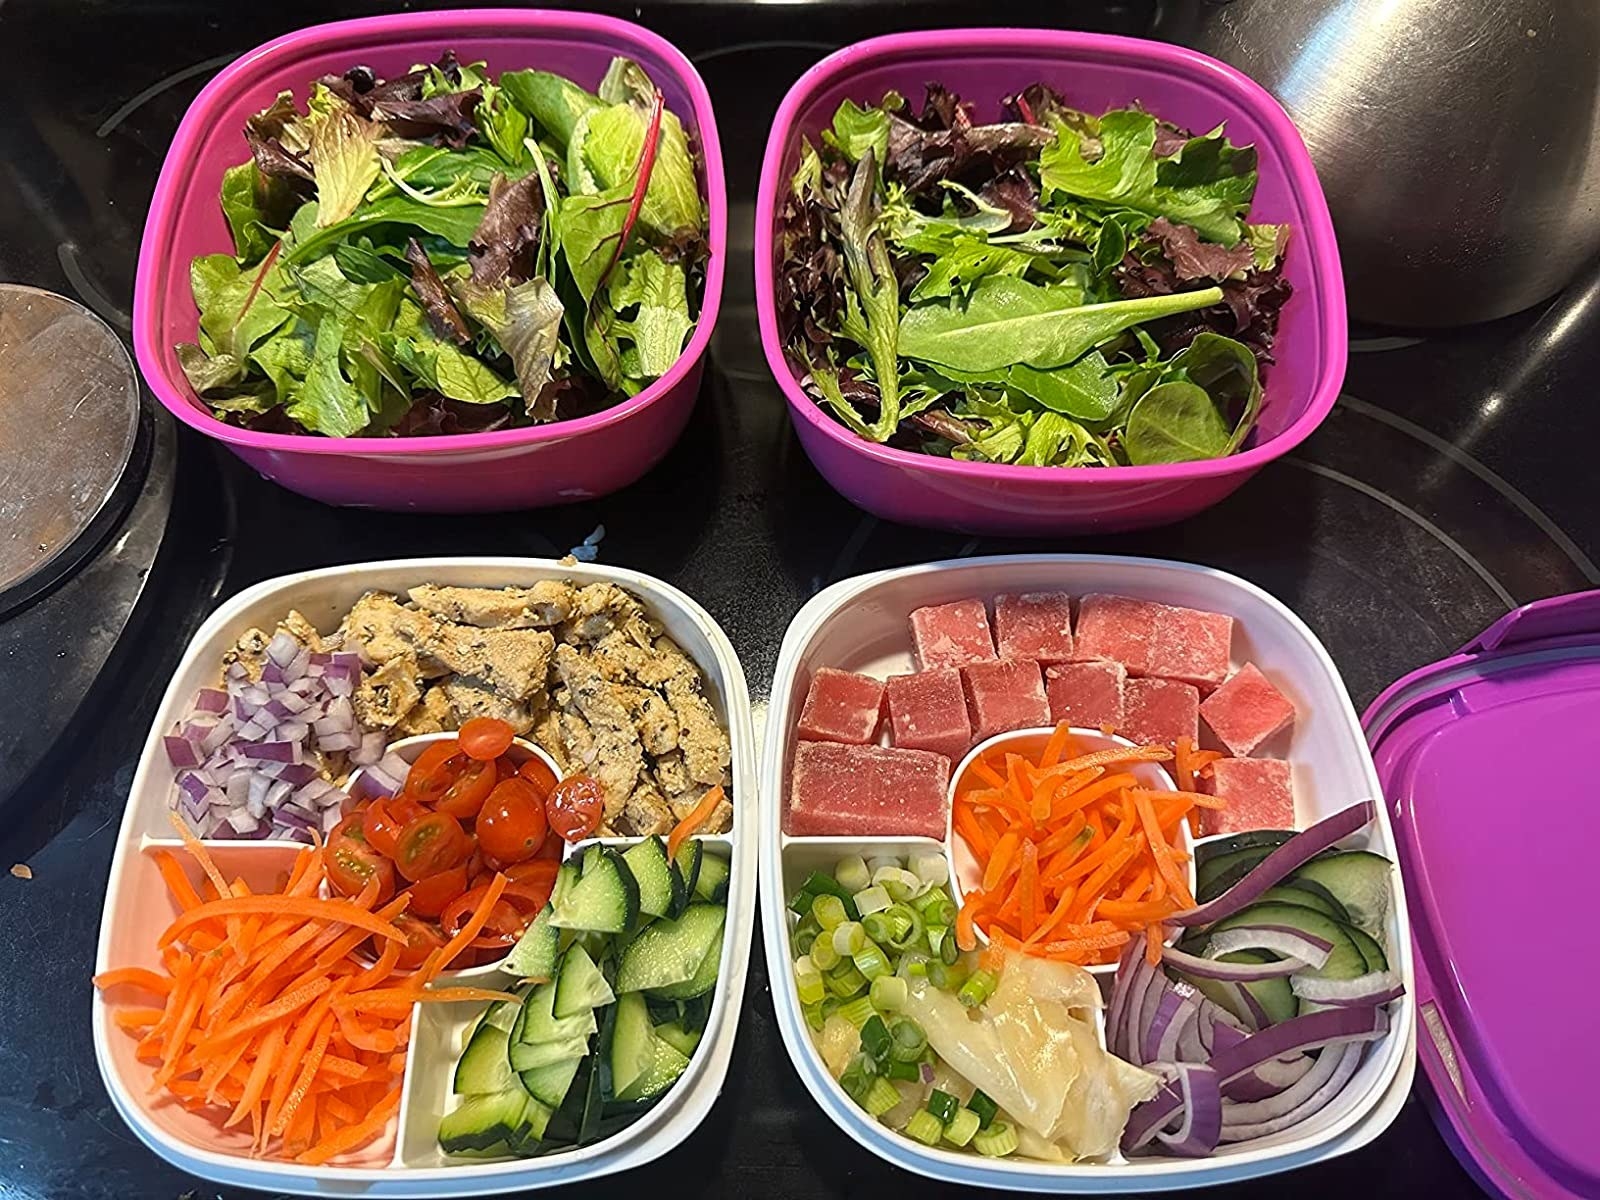 Reviewer image of two lunchboxes filled with salad ingredients